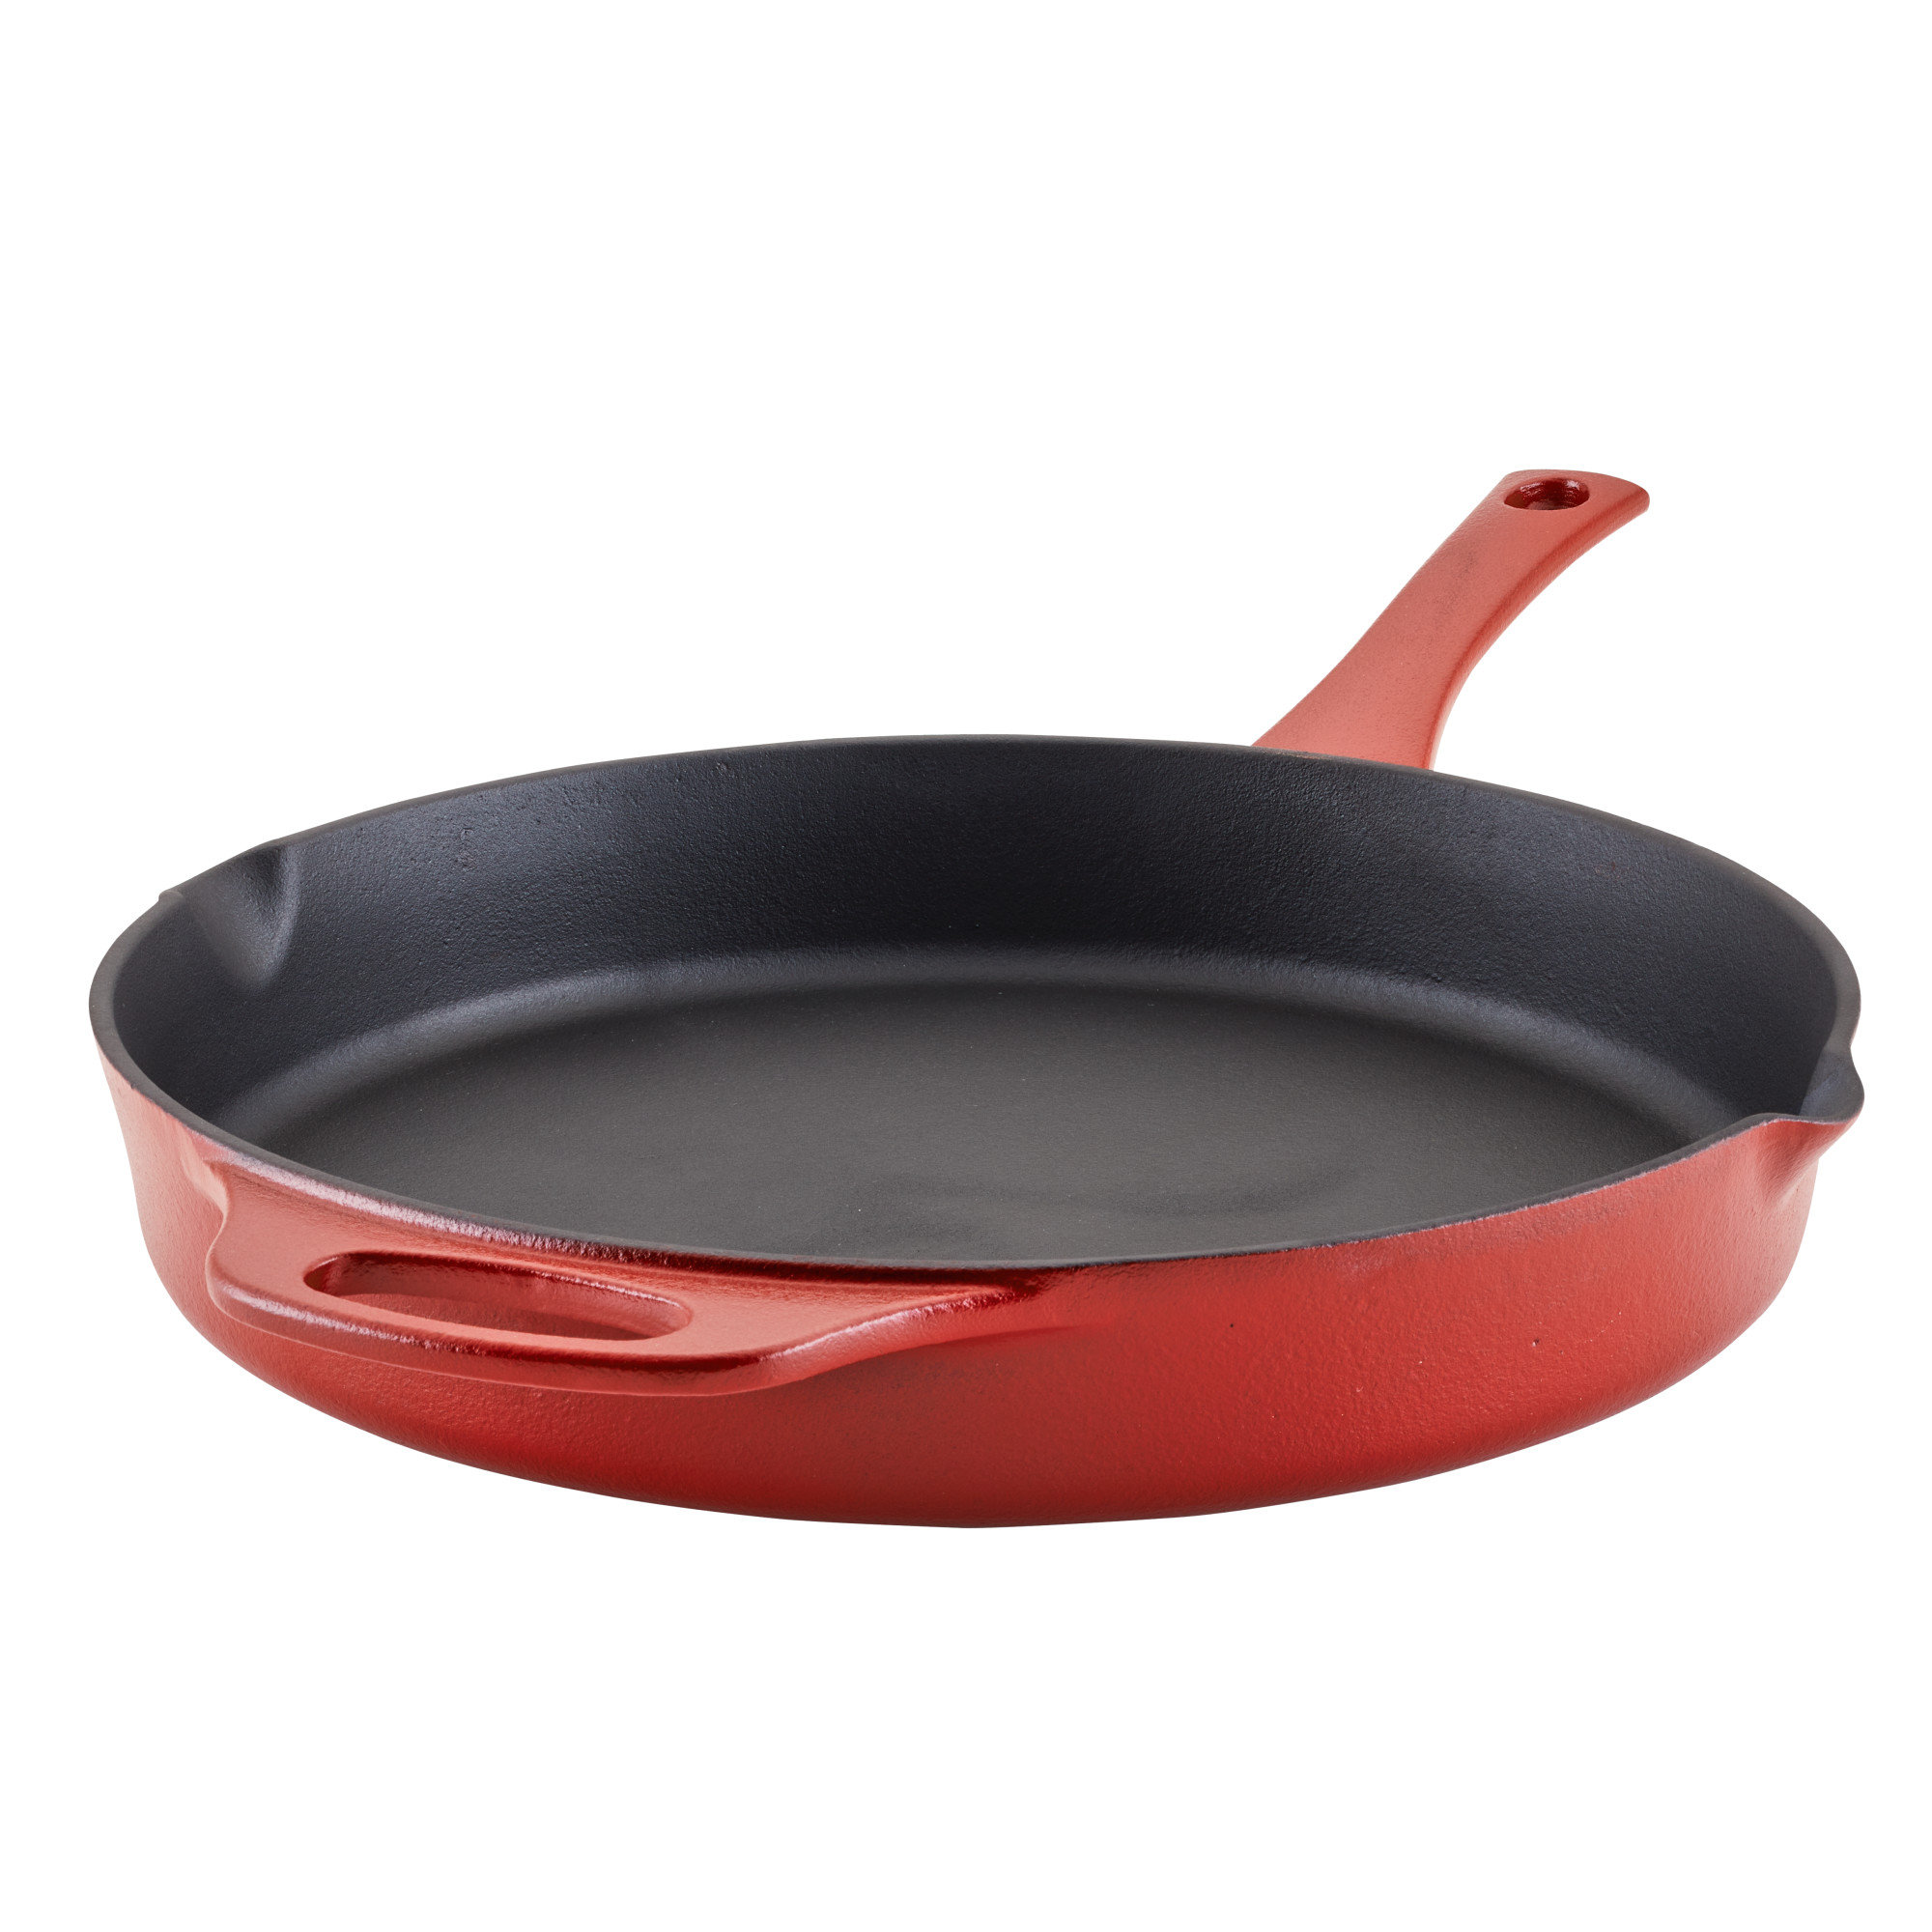 Hamilton Beach 10 Inch Enameled Coated Solid Cast Iron Frying Pan Skillet,  Red 